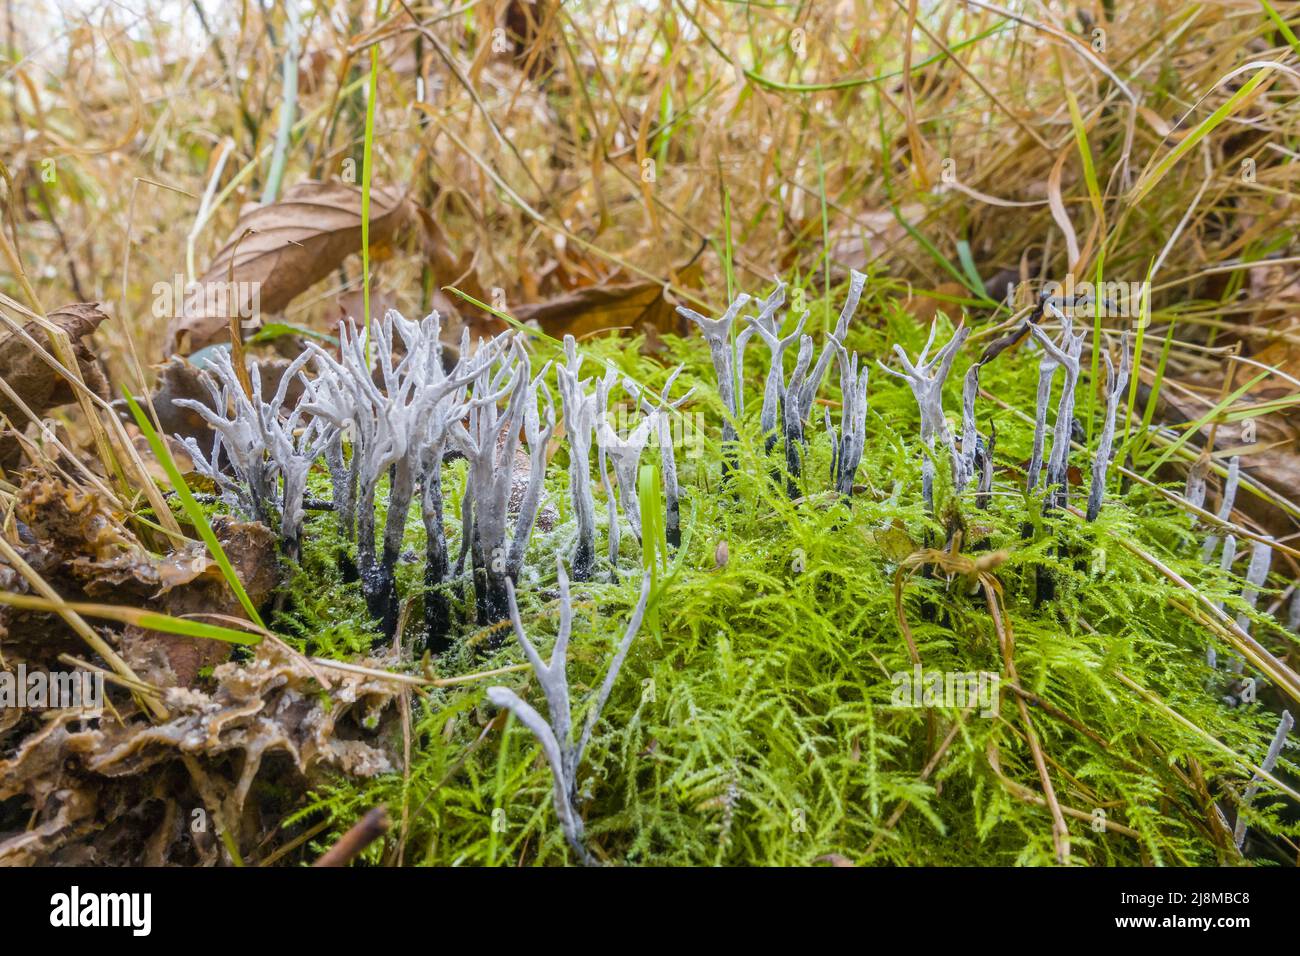 Candlesnuff fungus Xylaria hypoxylon (Xylariaceae) growing on a nature reserve in the Herefordshire UK countryside, December 2021. Stock Photo